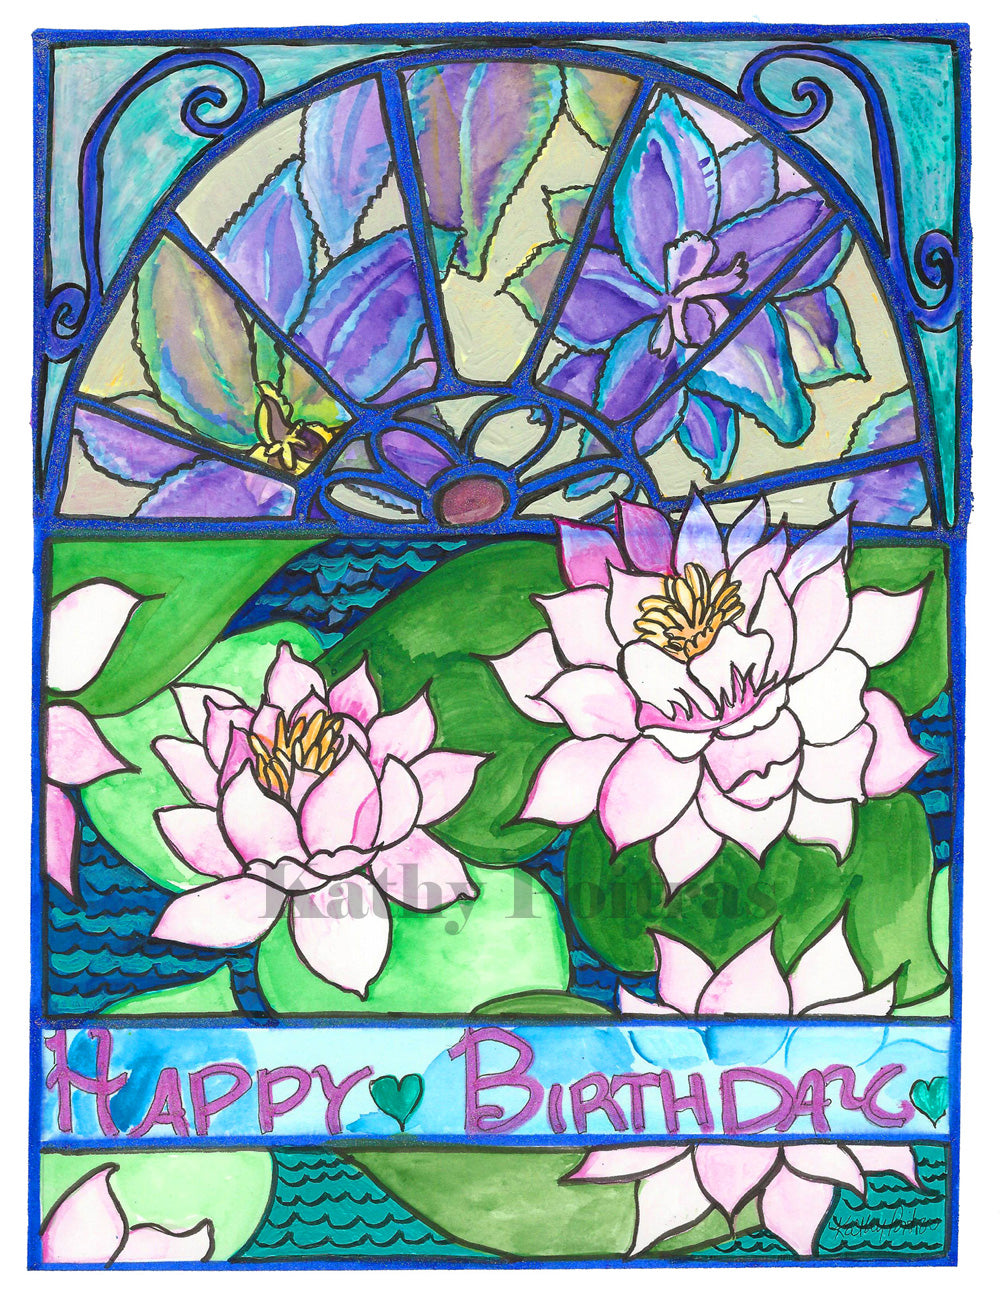 Mix and Match Flower of the month Birthday Cards by artist Kathy Poitras